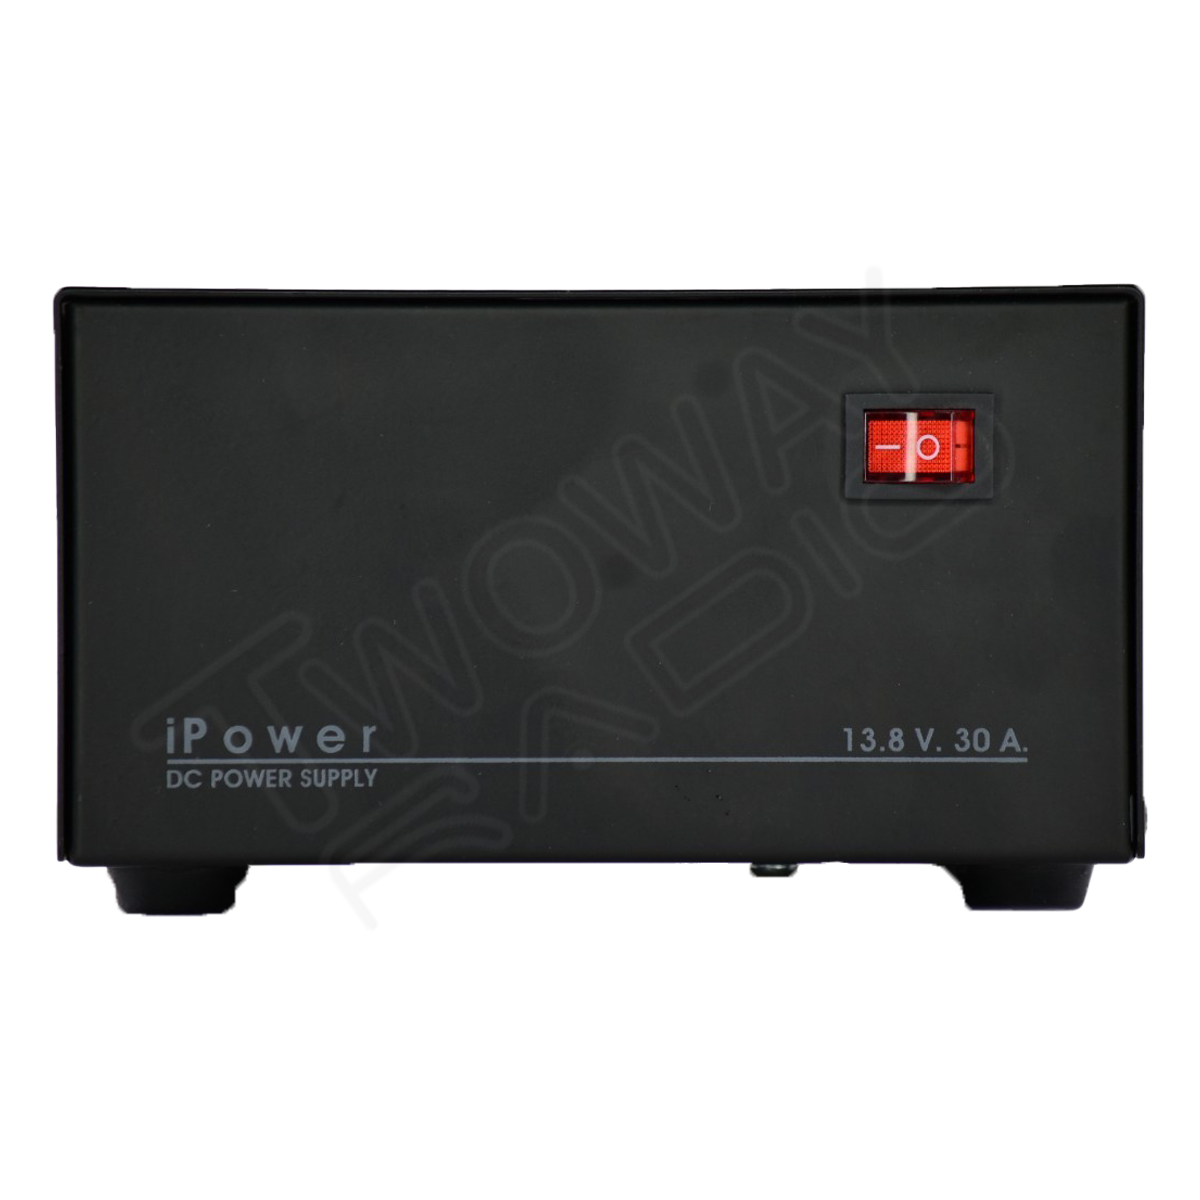 Power supply iPower-13.8V. 30A.